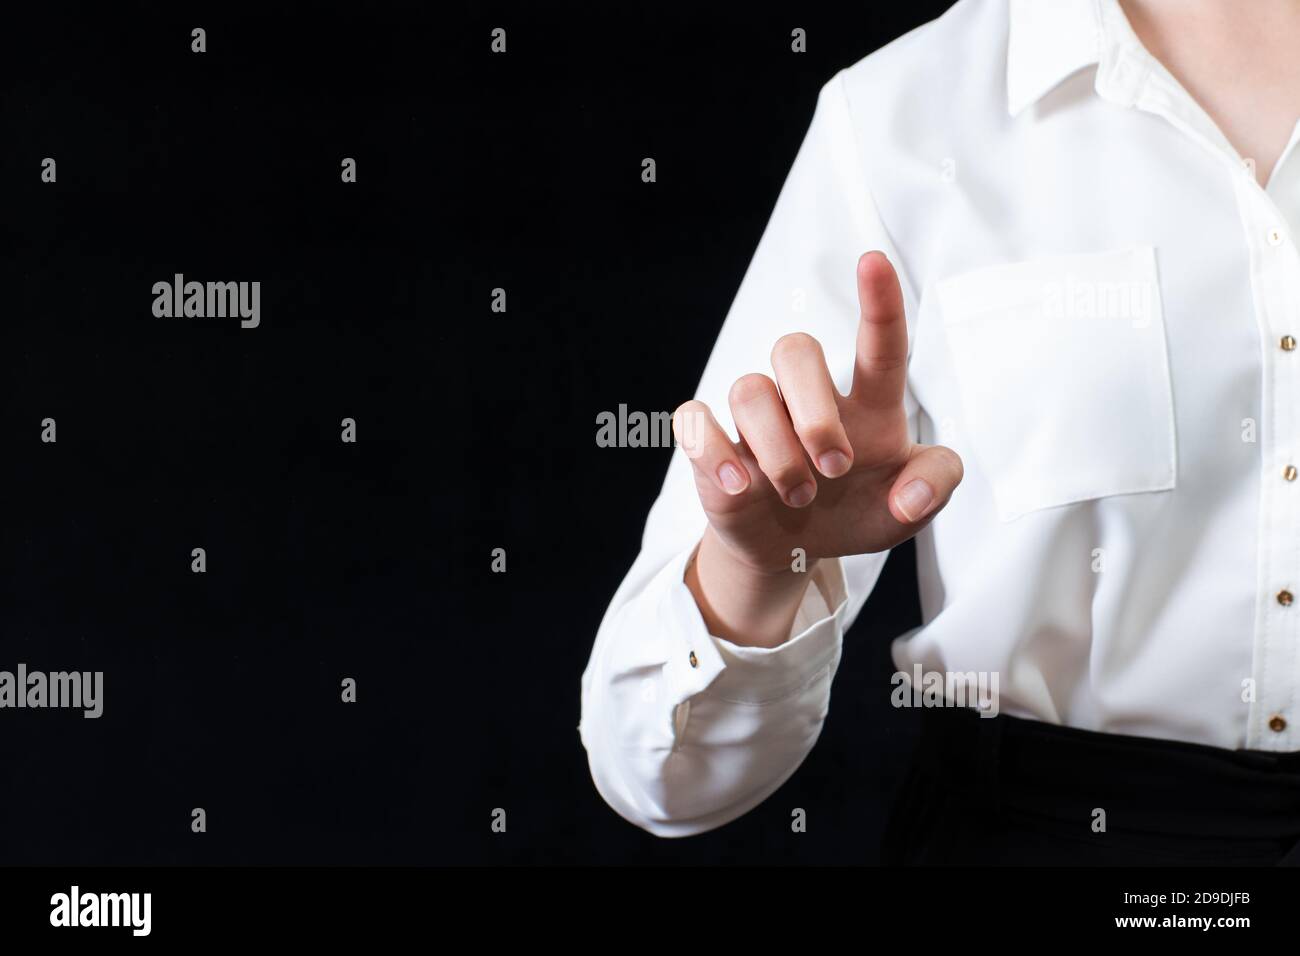 Businesswoman in front of visual touchscreen, isolated on black background. Business concept. Online learning Stock Photo